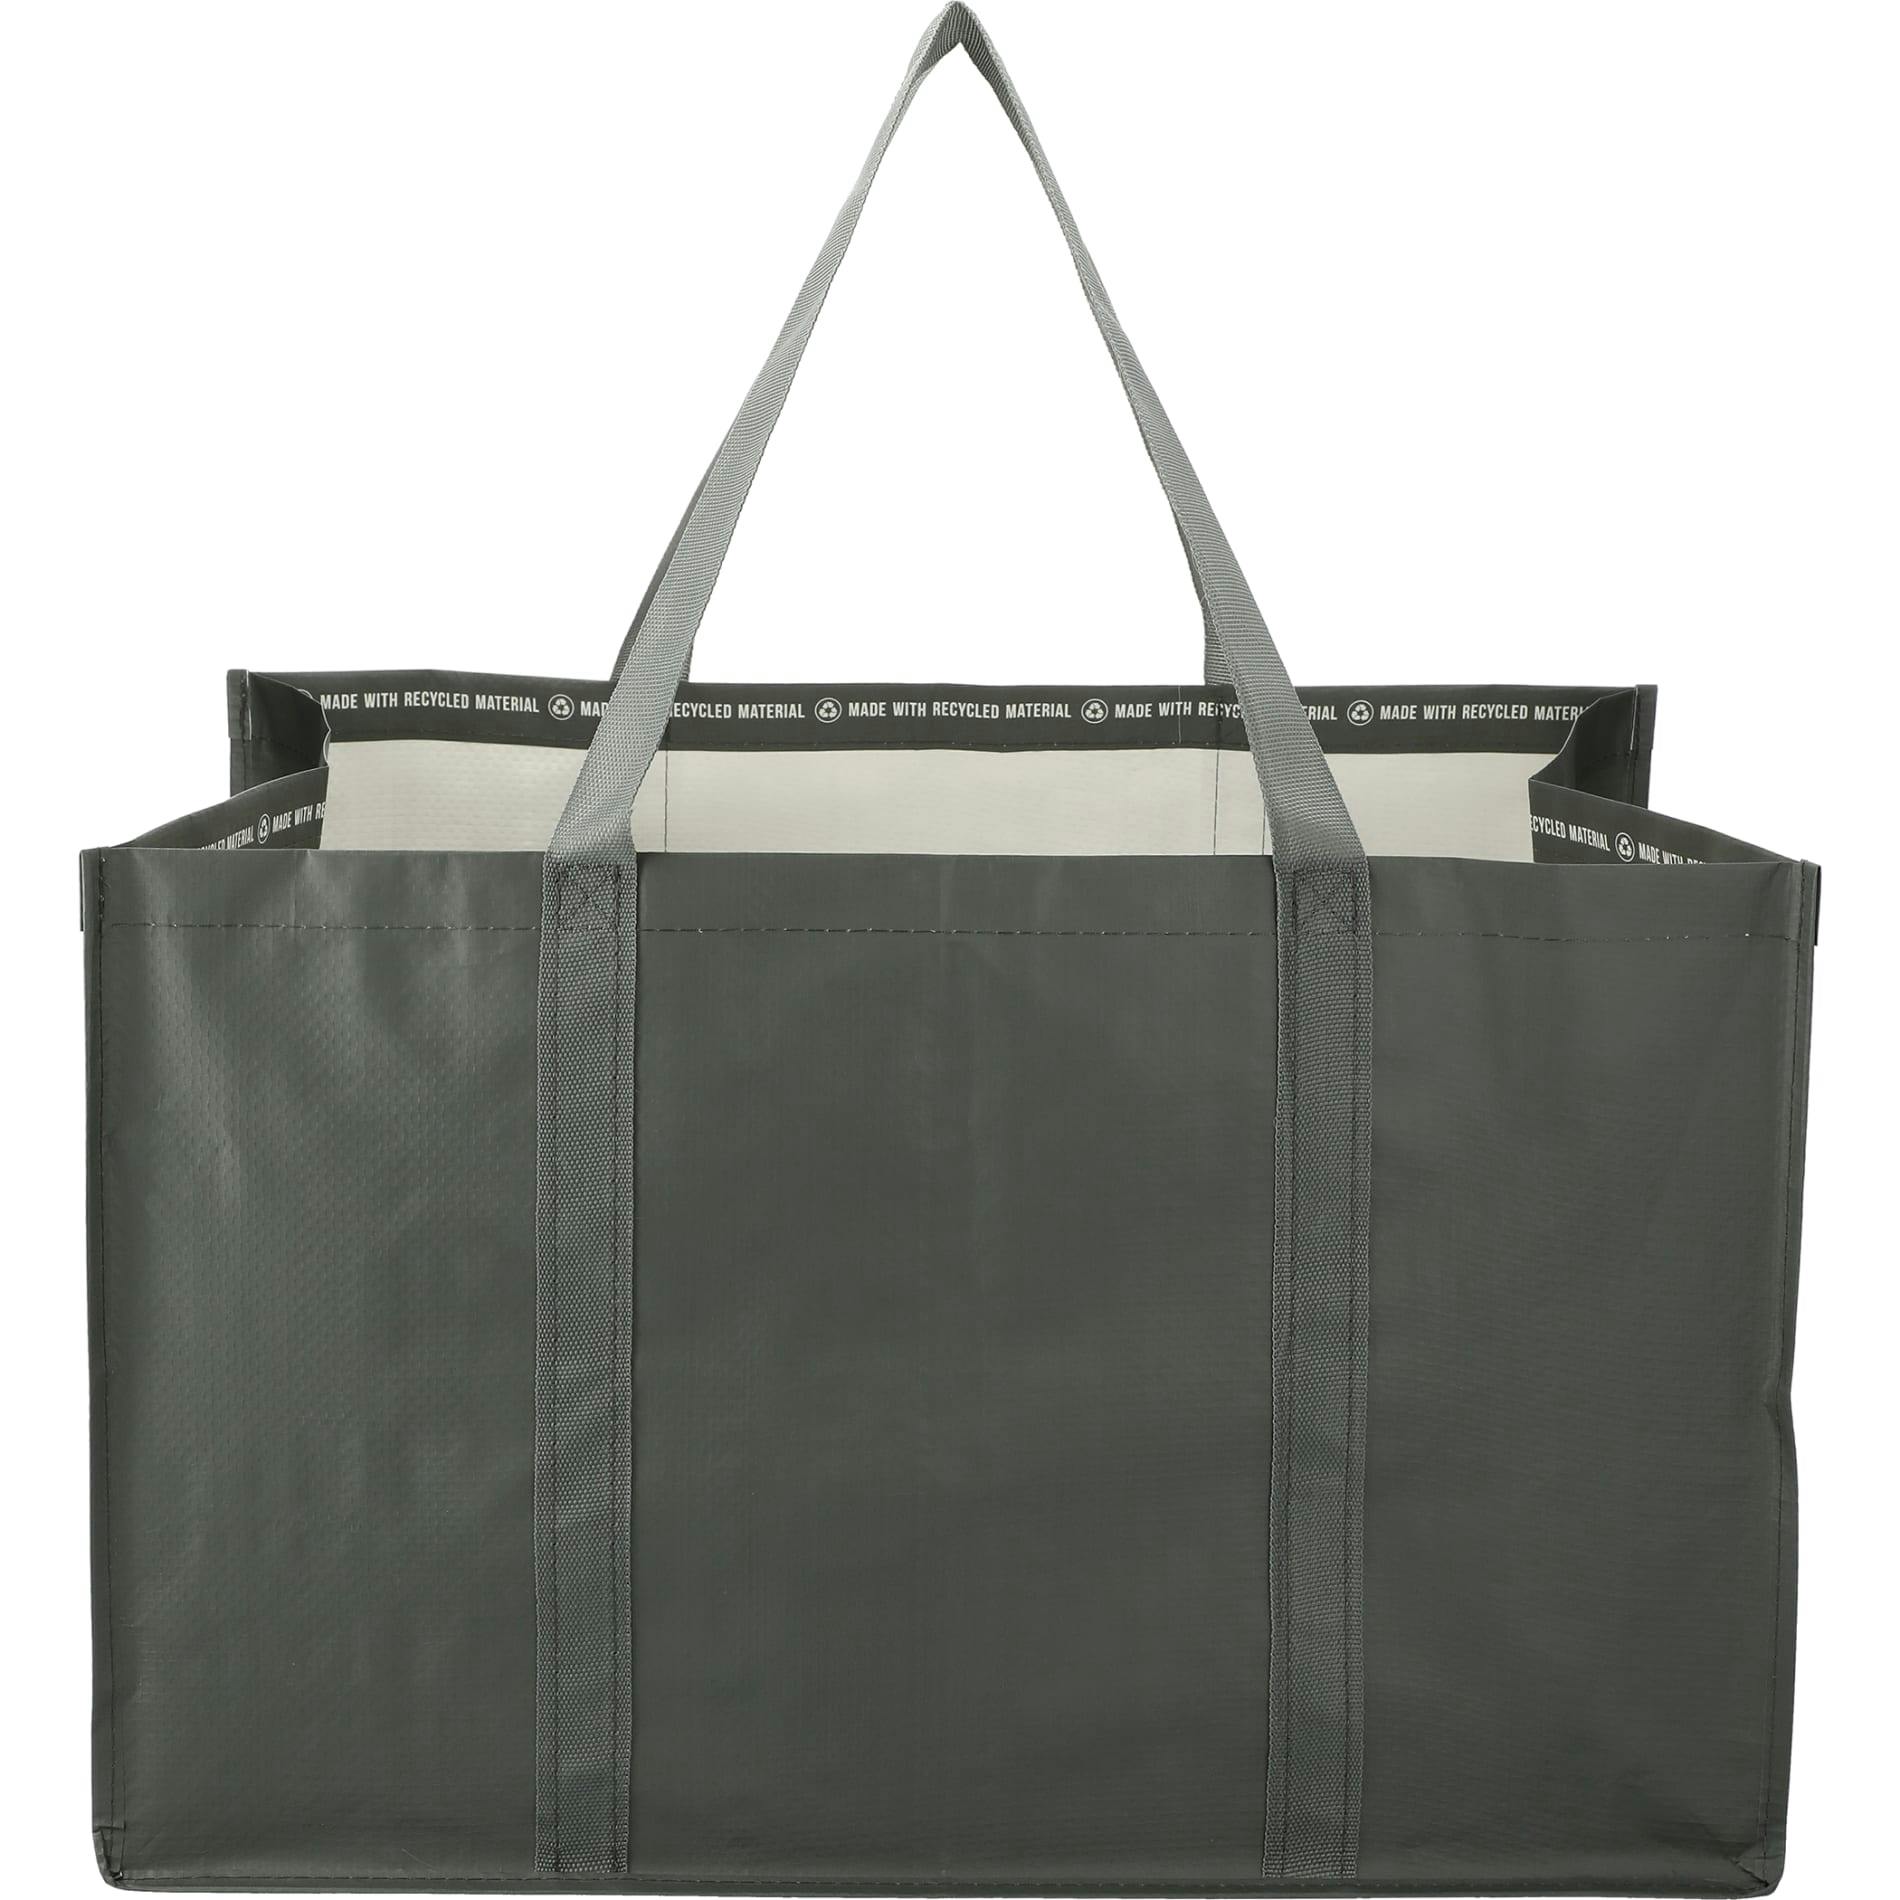 Recycled Woven Utility Tote - additional Image 2